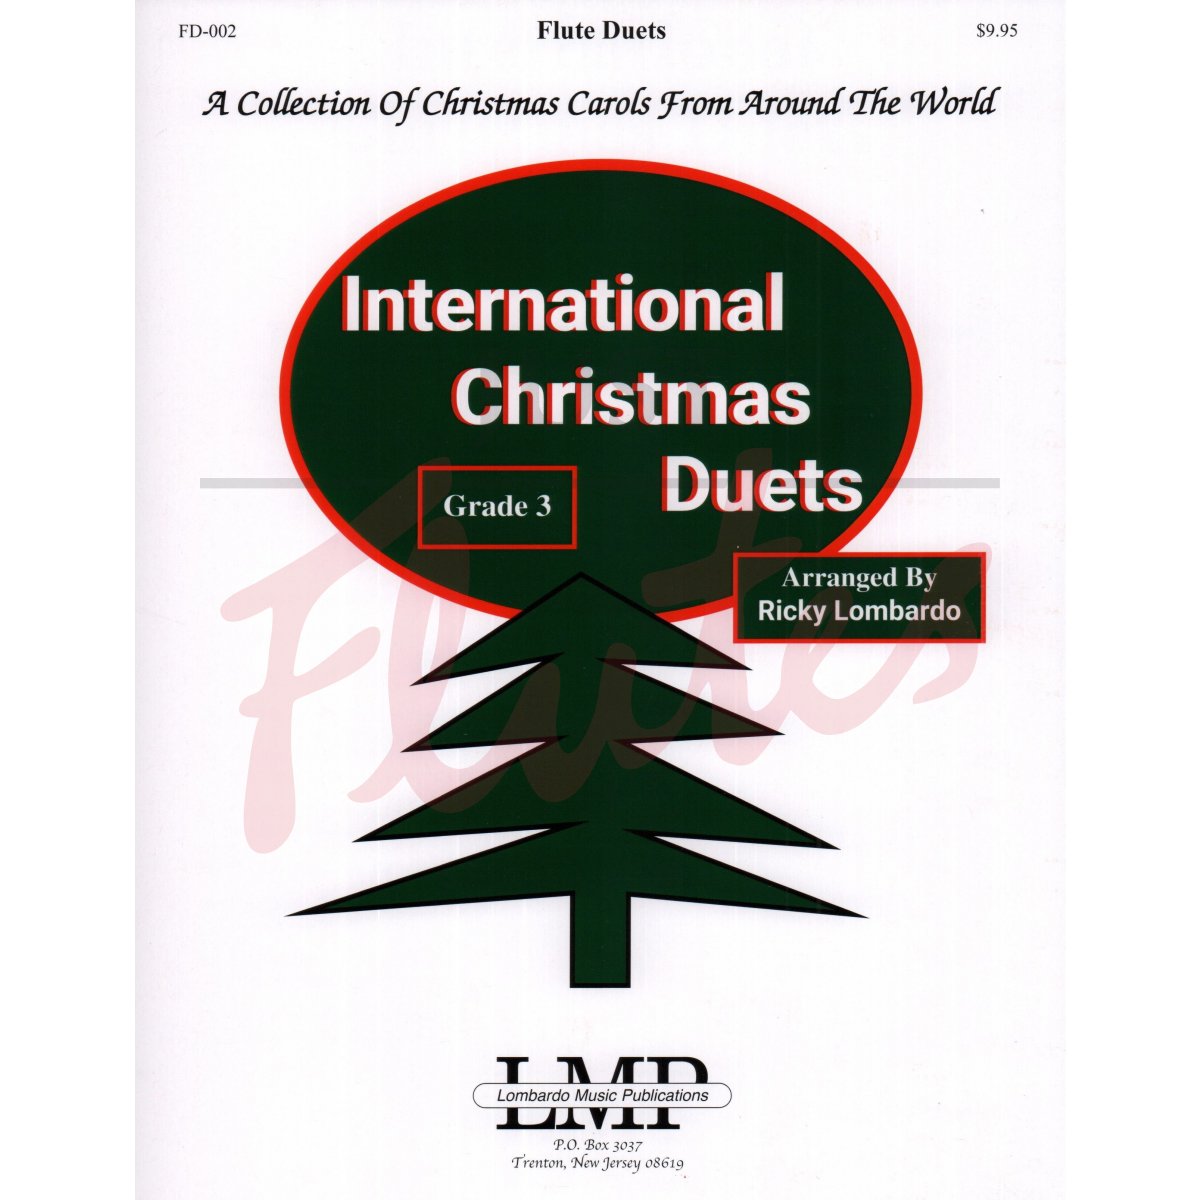 International Christmas Duets: A Collection of Carol from Around the World for Two Flutes